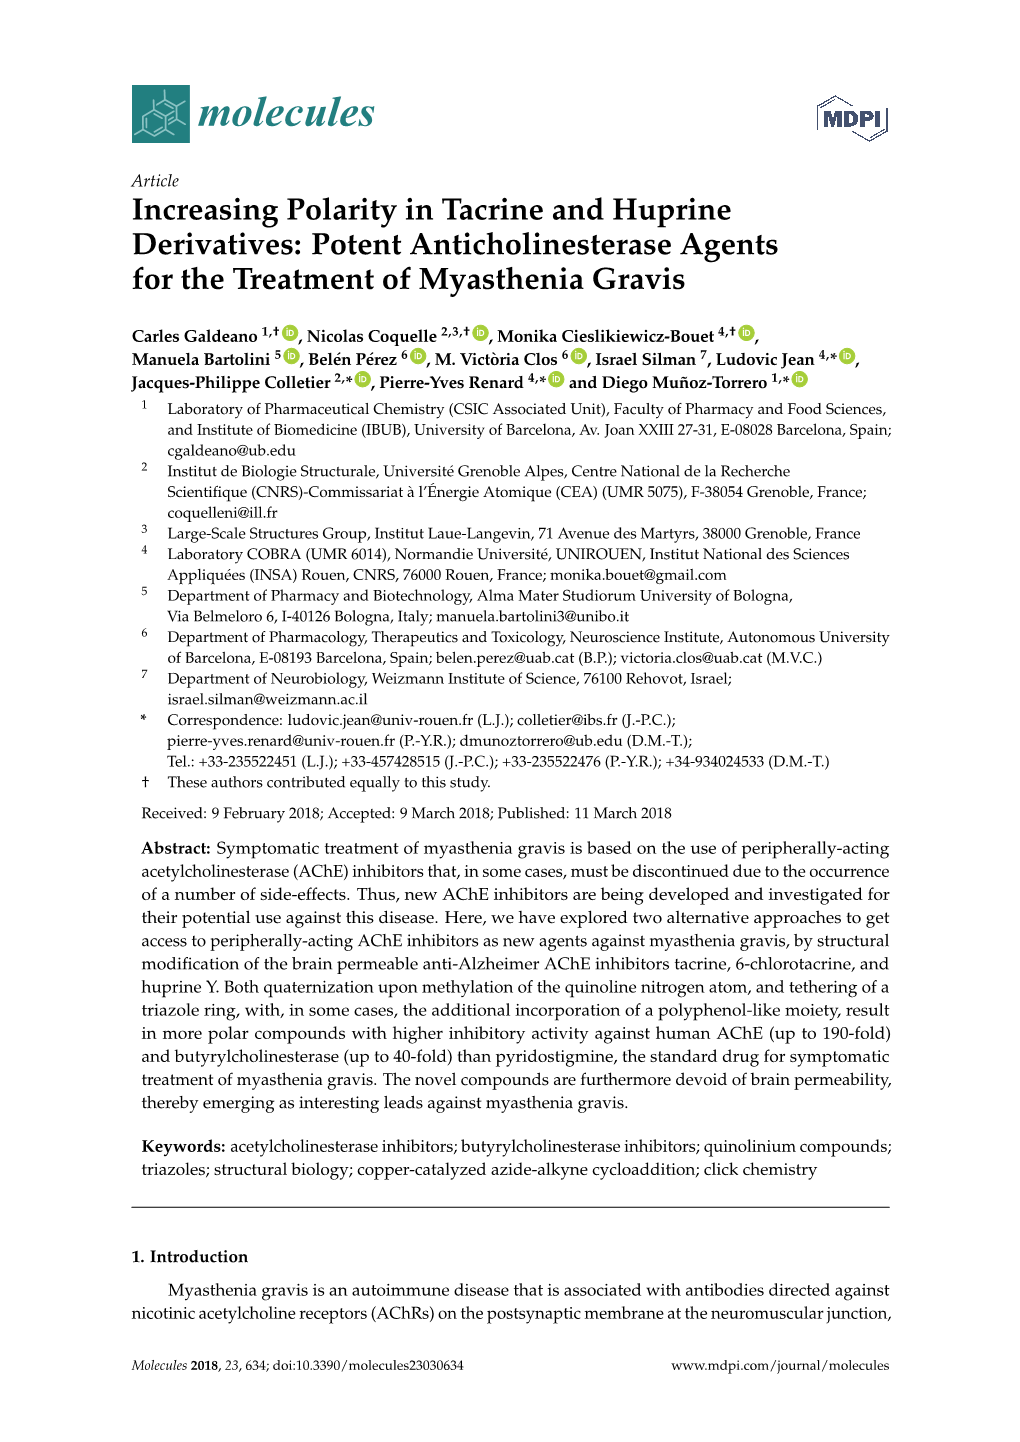 Increasing Polarity in Tacrine and Huprine Derivatives: Potent Anticholinesterase Agents for the Treatment of Myasthenia Gravis